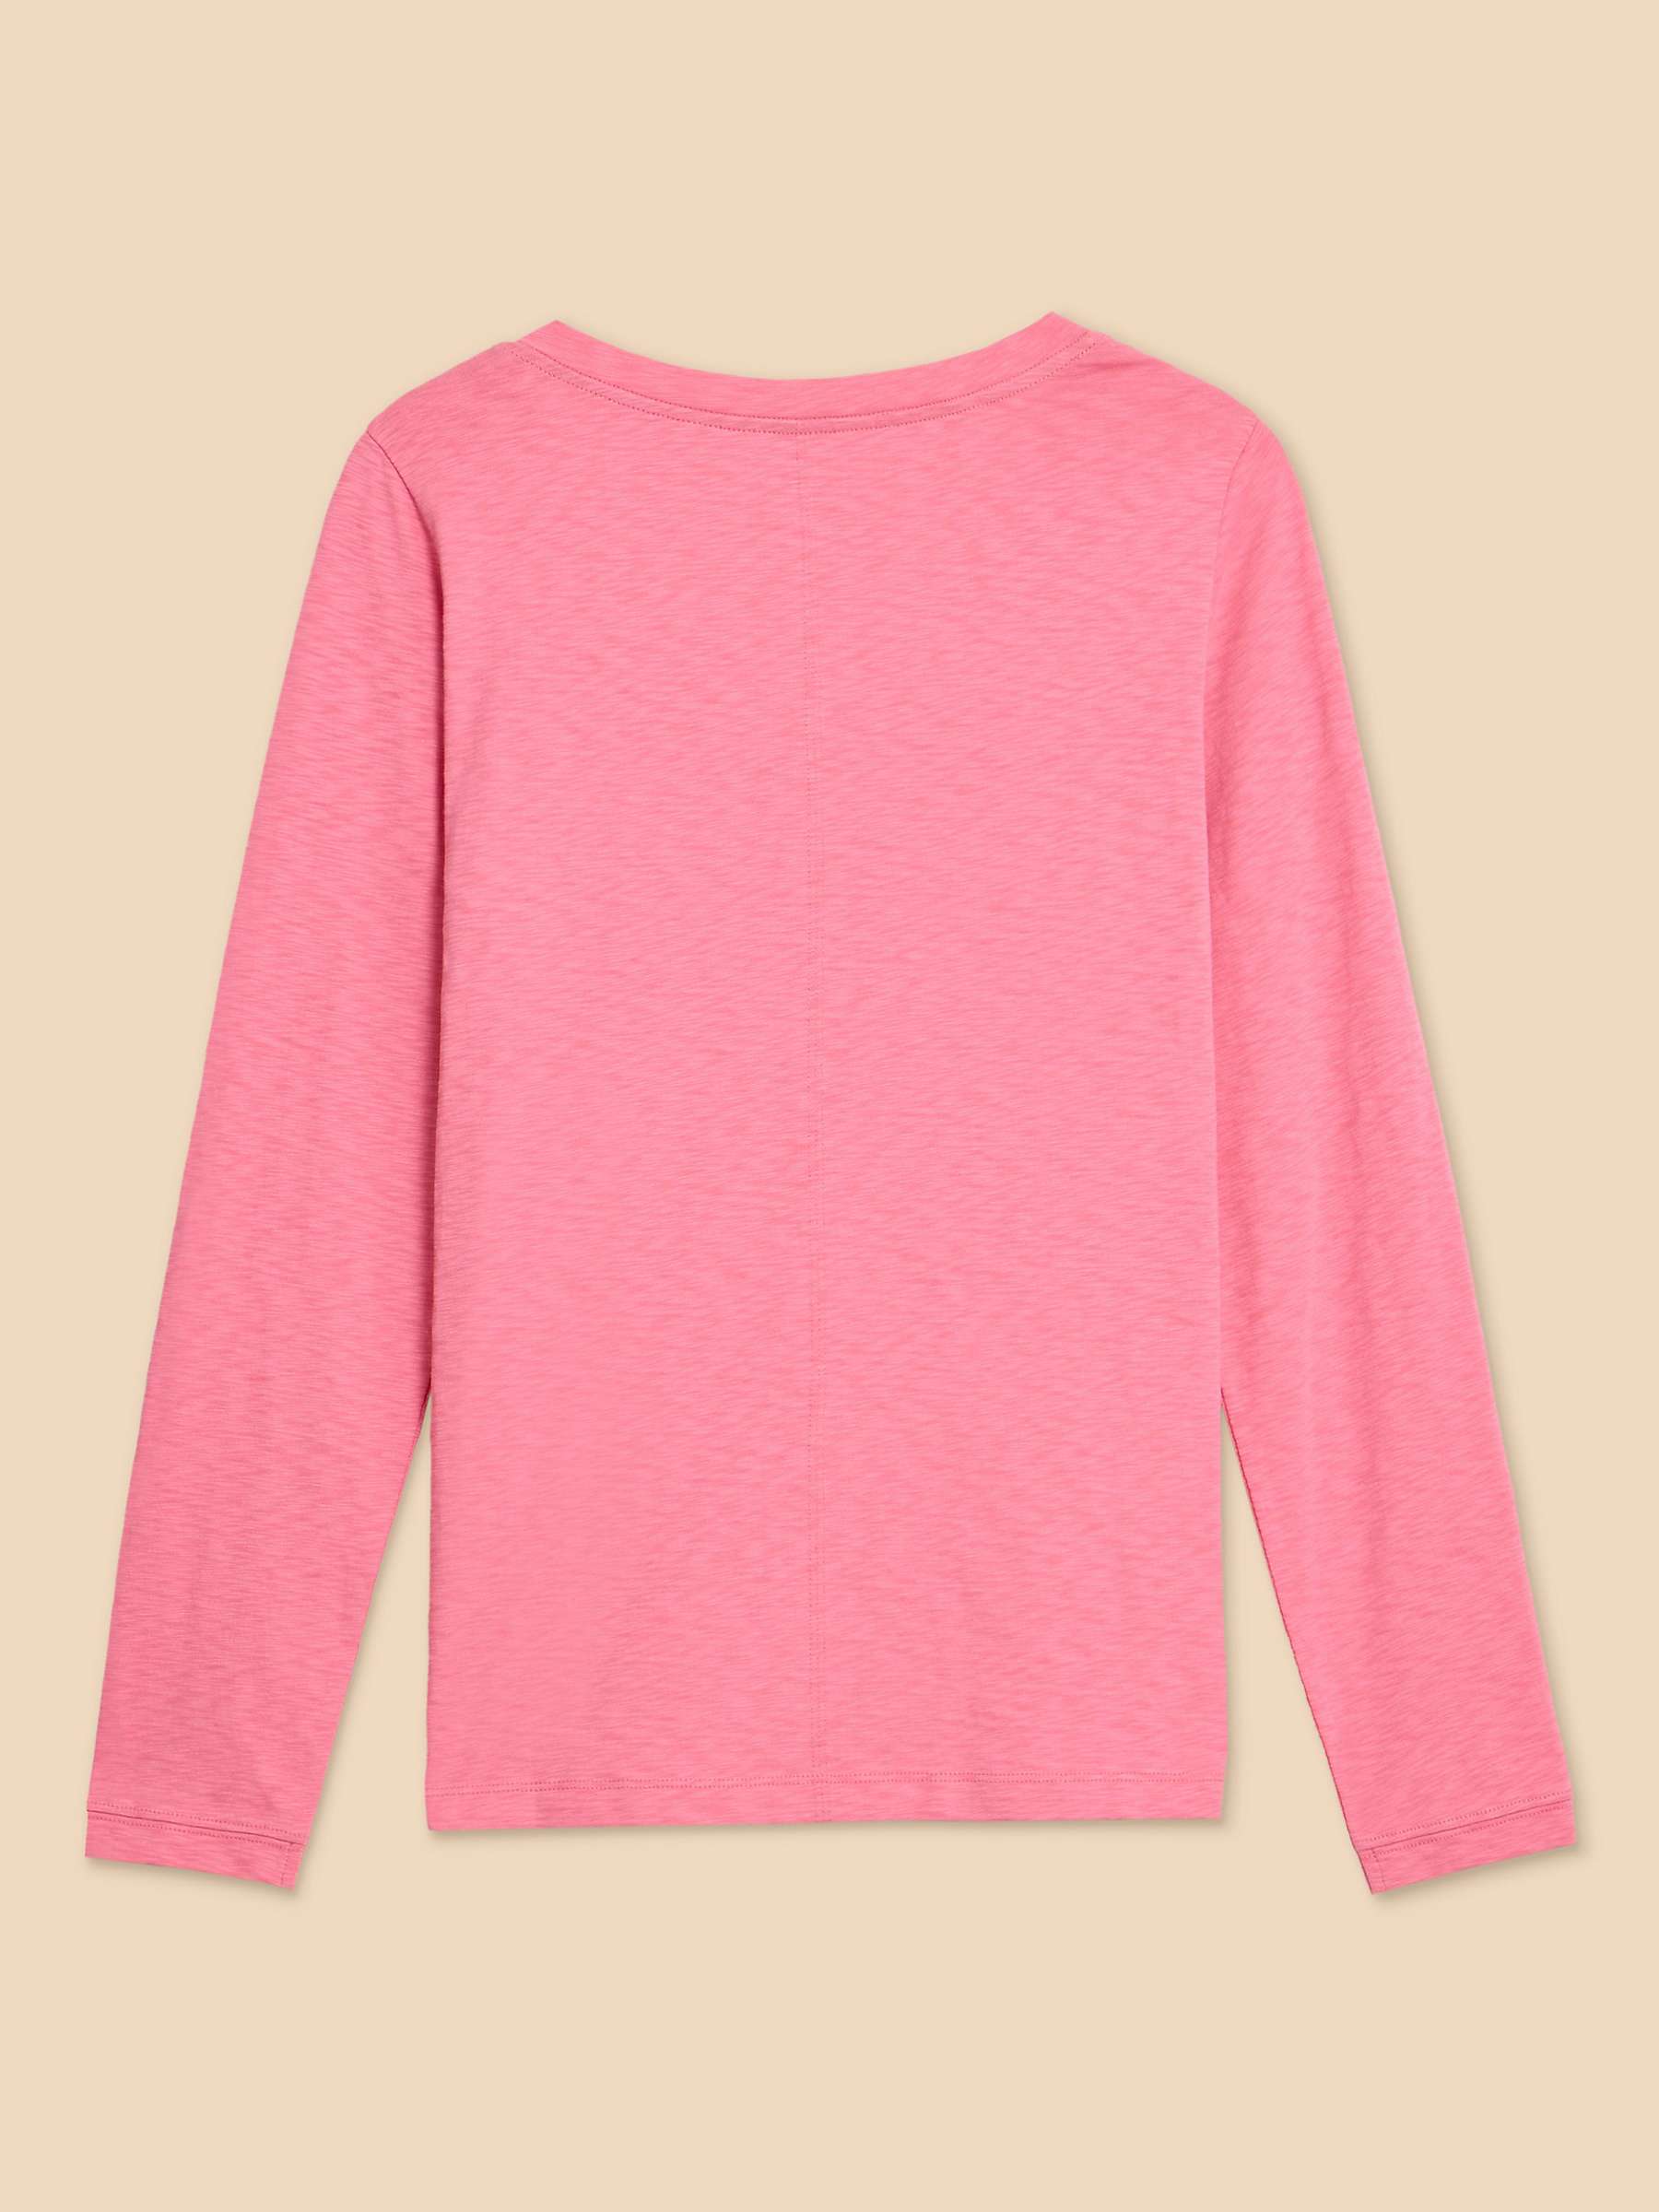 Buy White Stuff Nelly Cotton Long Sleeve Top Online at johnlewis.com